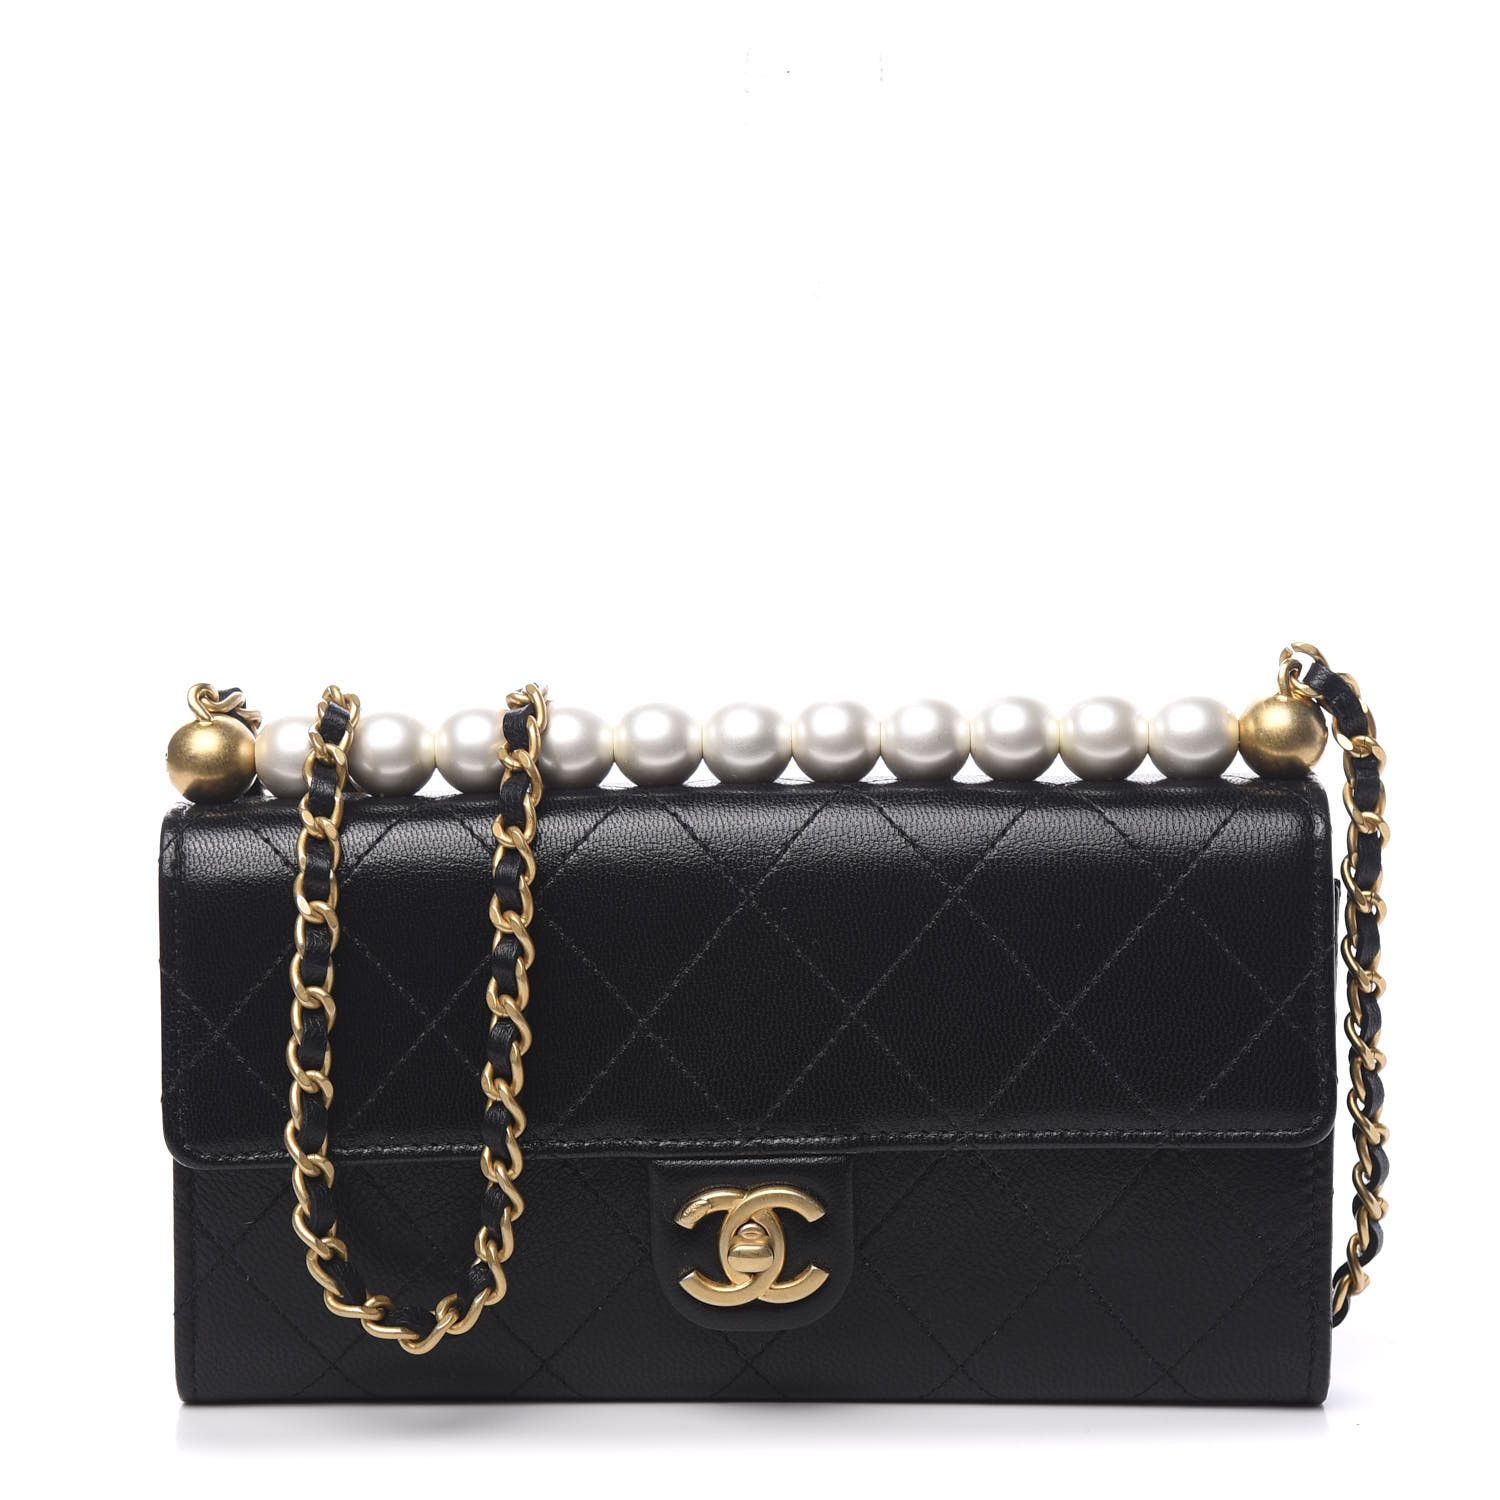 Goatskin Quilted Chic Pearls Clutch With Chain Black | Fashionphile